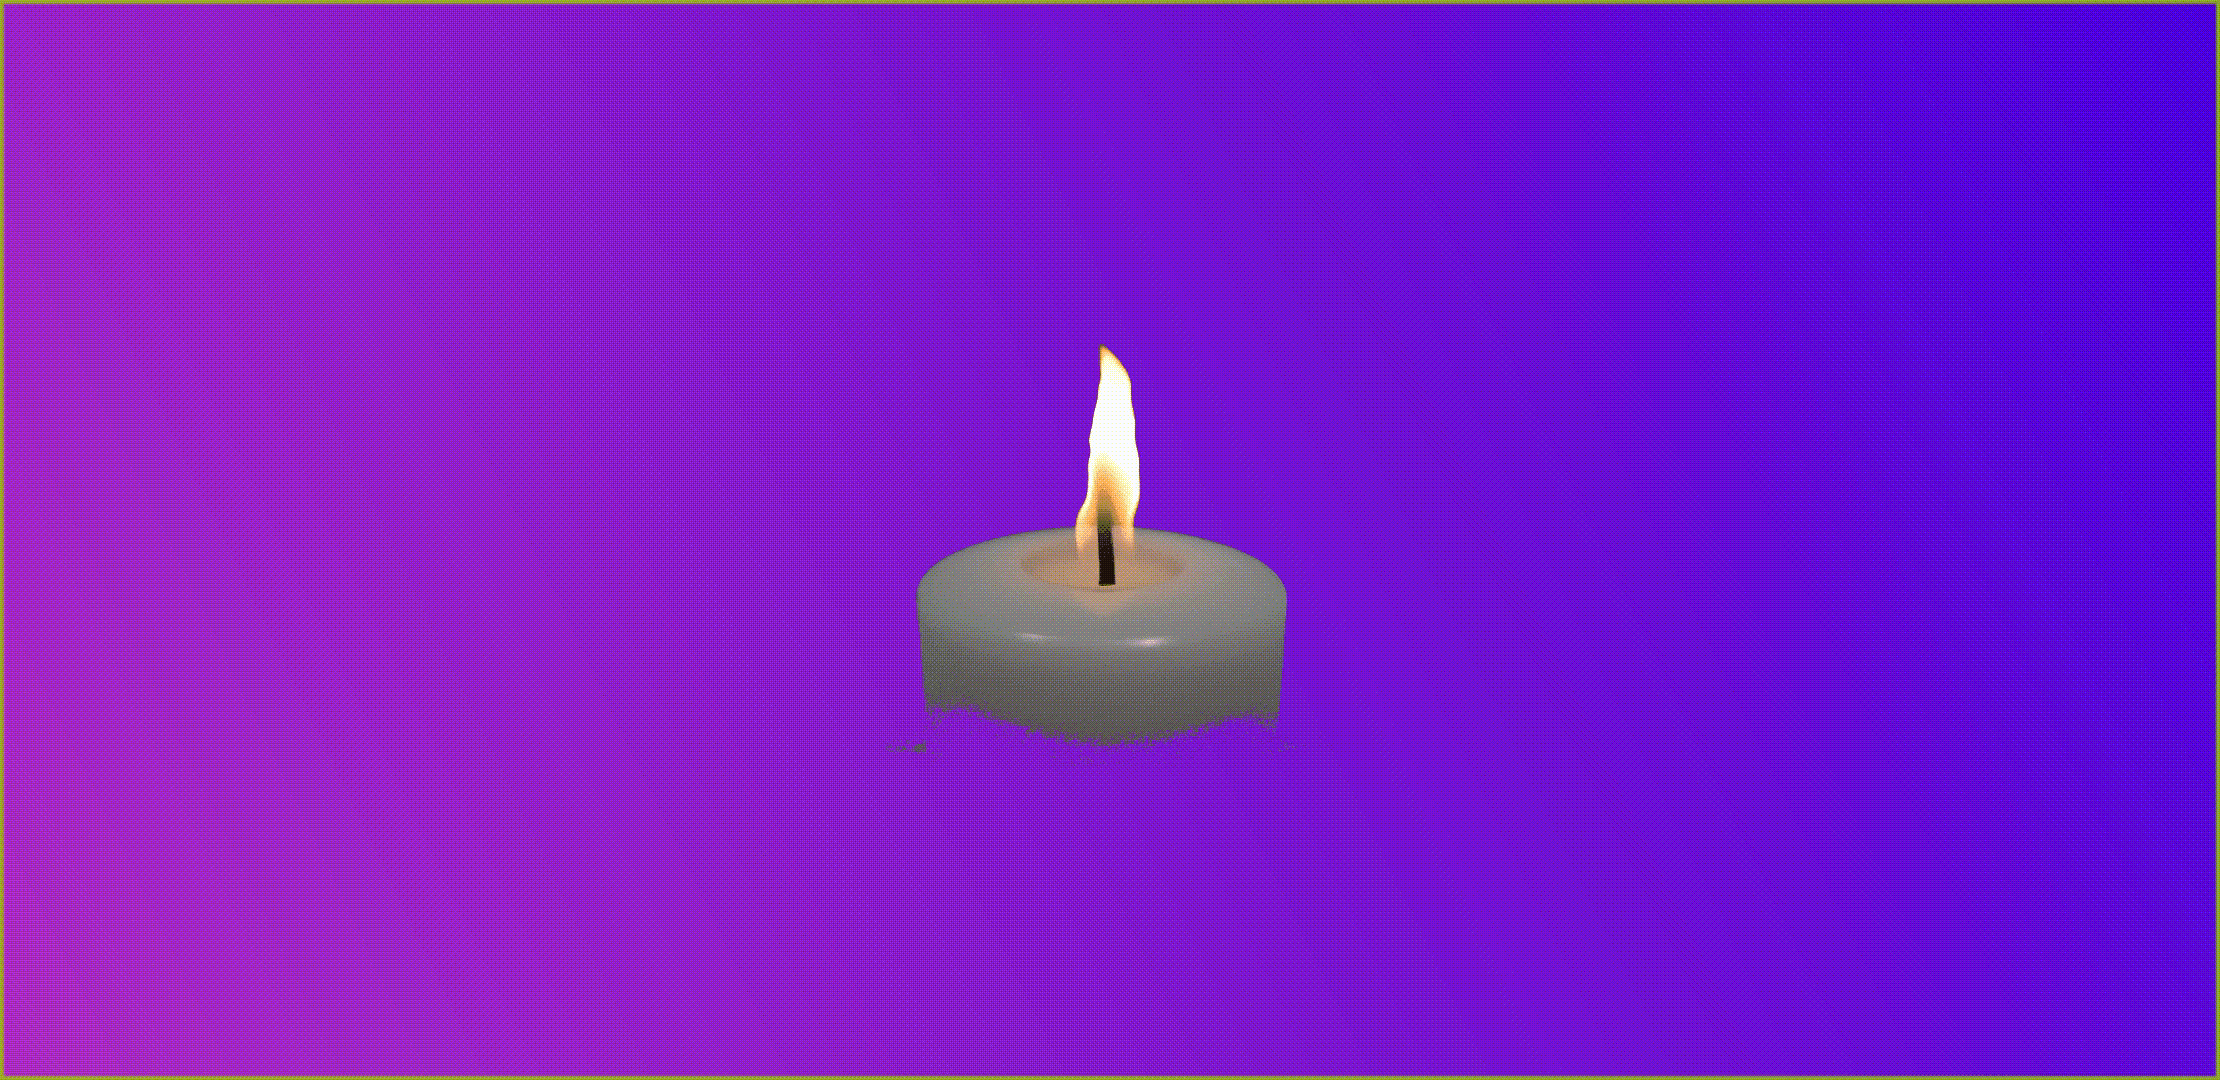 gif with expanding flower cross-fading into a shrinking candle